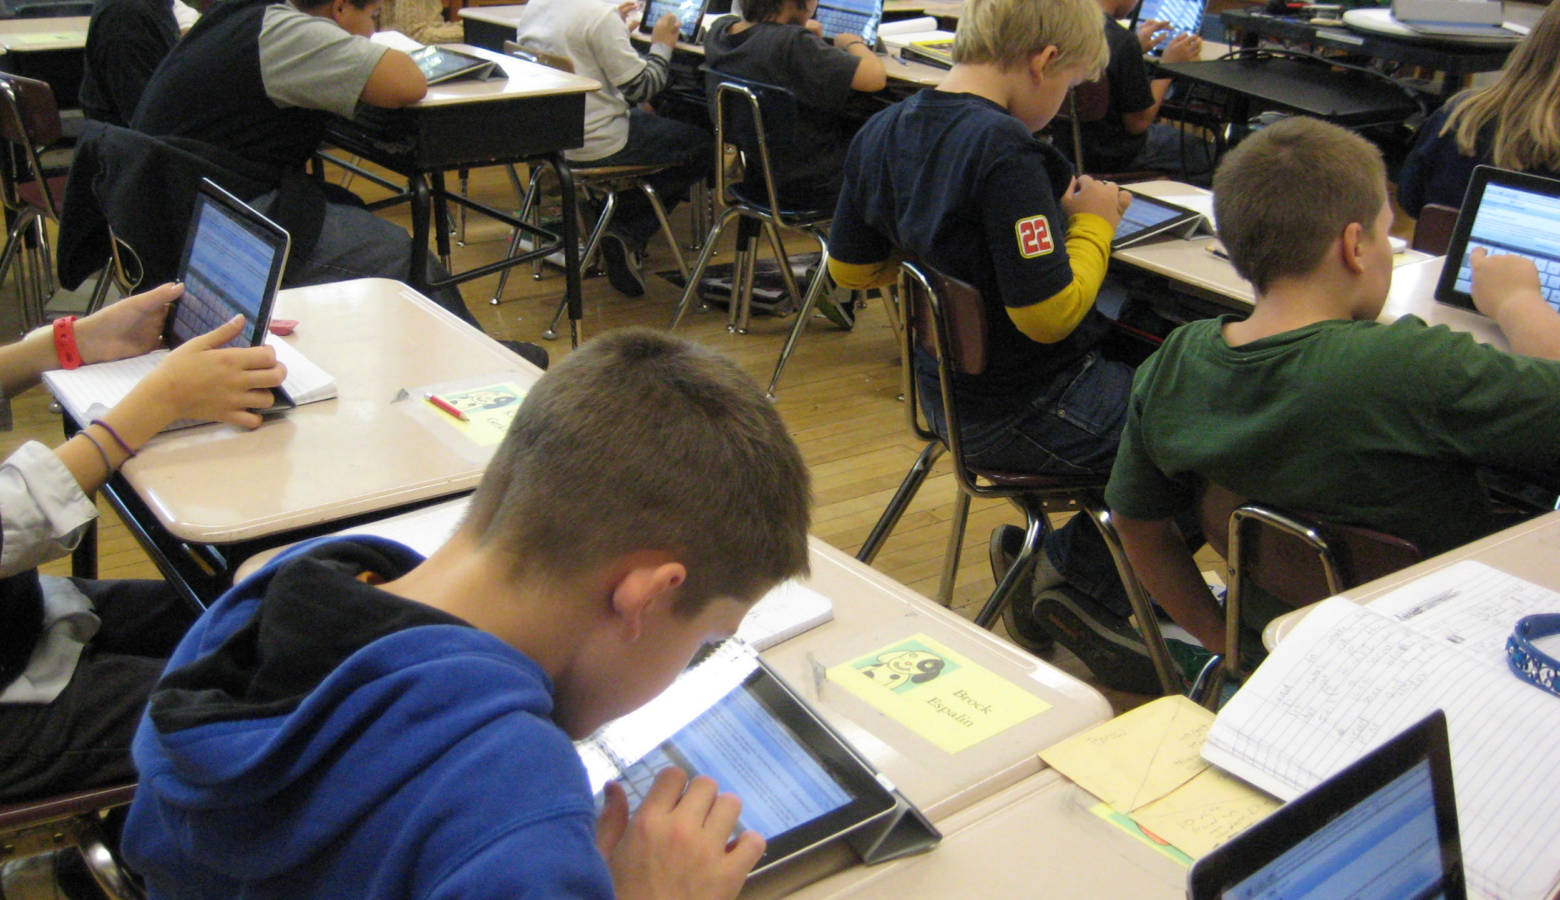 Student take a writing assessment using tablets. (BarbaraLN/Flickr)